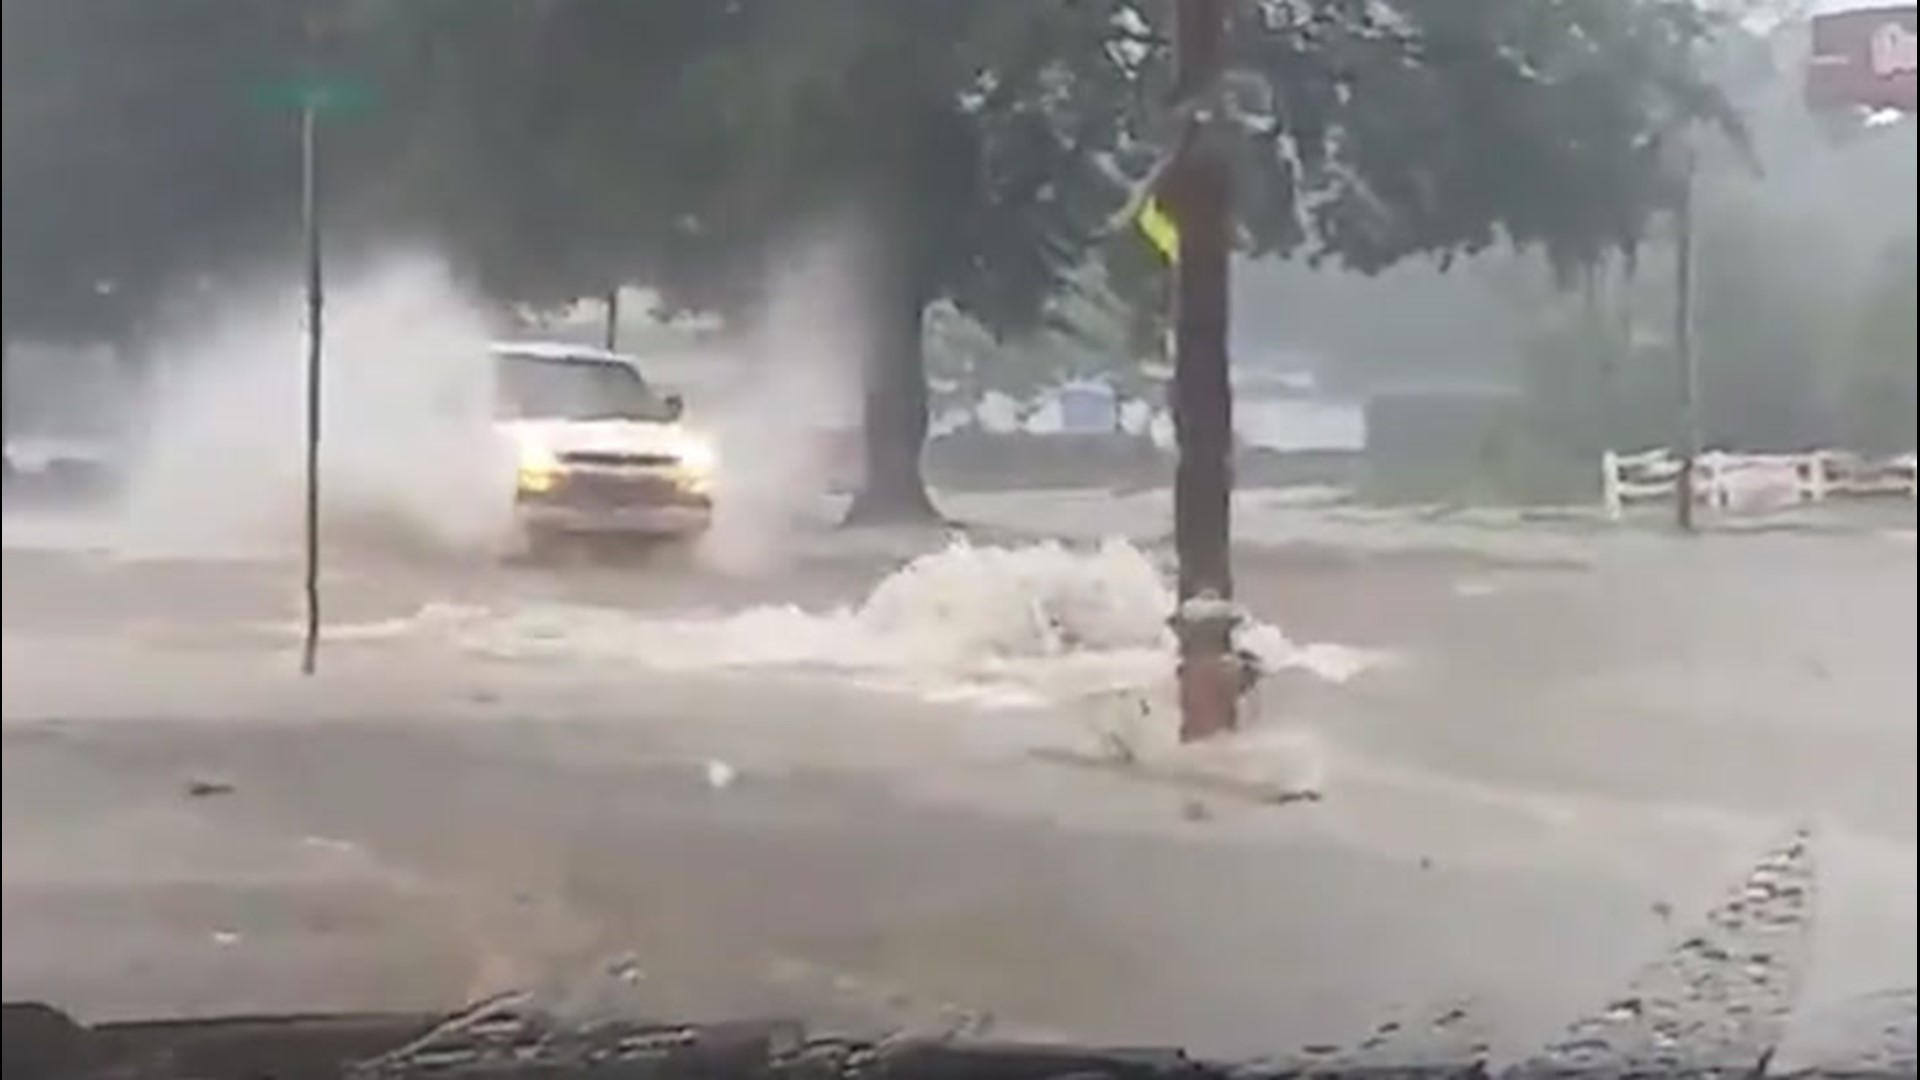 Storms dumped over 3 inches of rain in Hot Springs, Arkansas, on June 29. Roads were flooded but some drivers dangerously drove through.